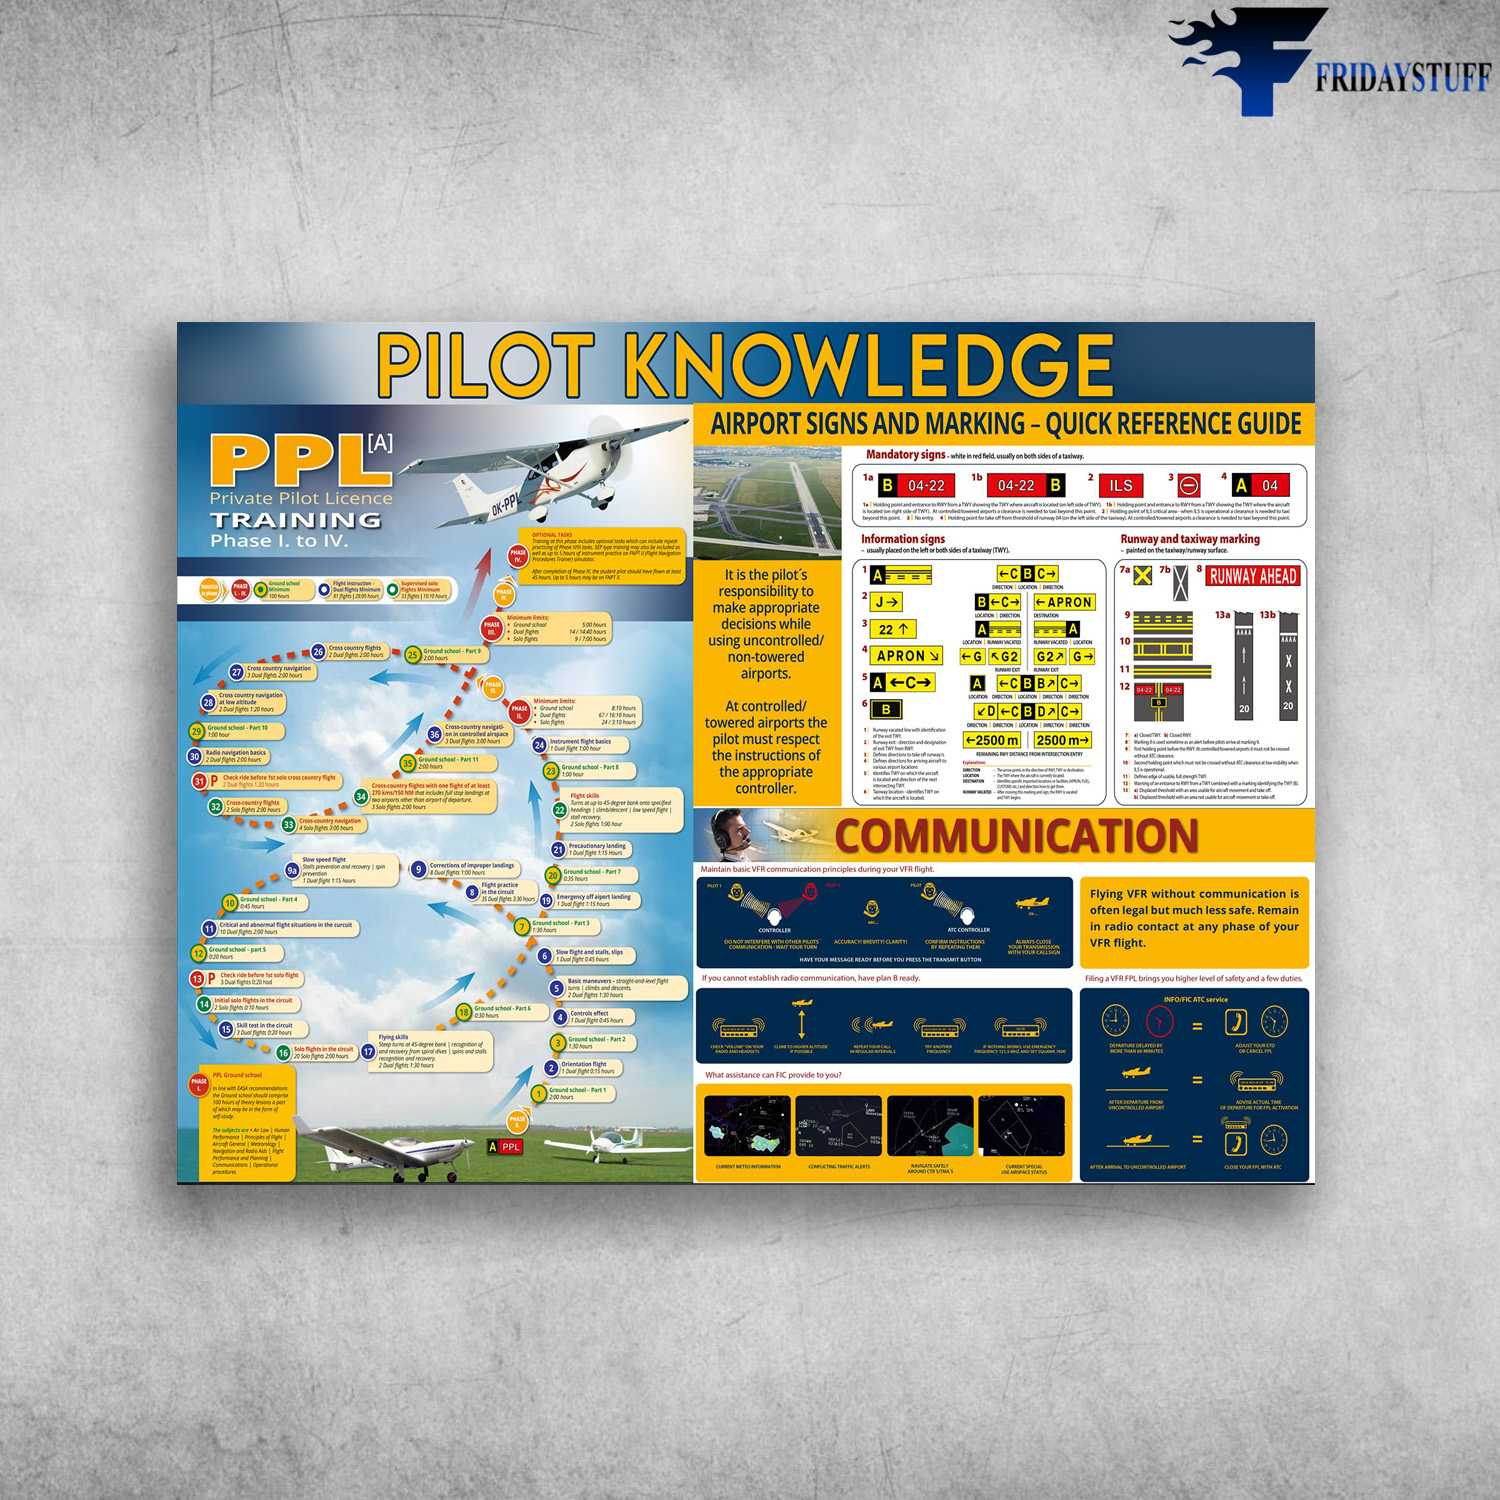 Pilot Knowledge, Private Pilot Licence Training, Airport Signs And Marking, Quick Reference Guide